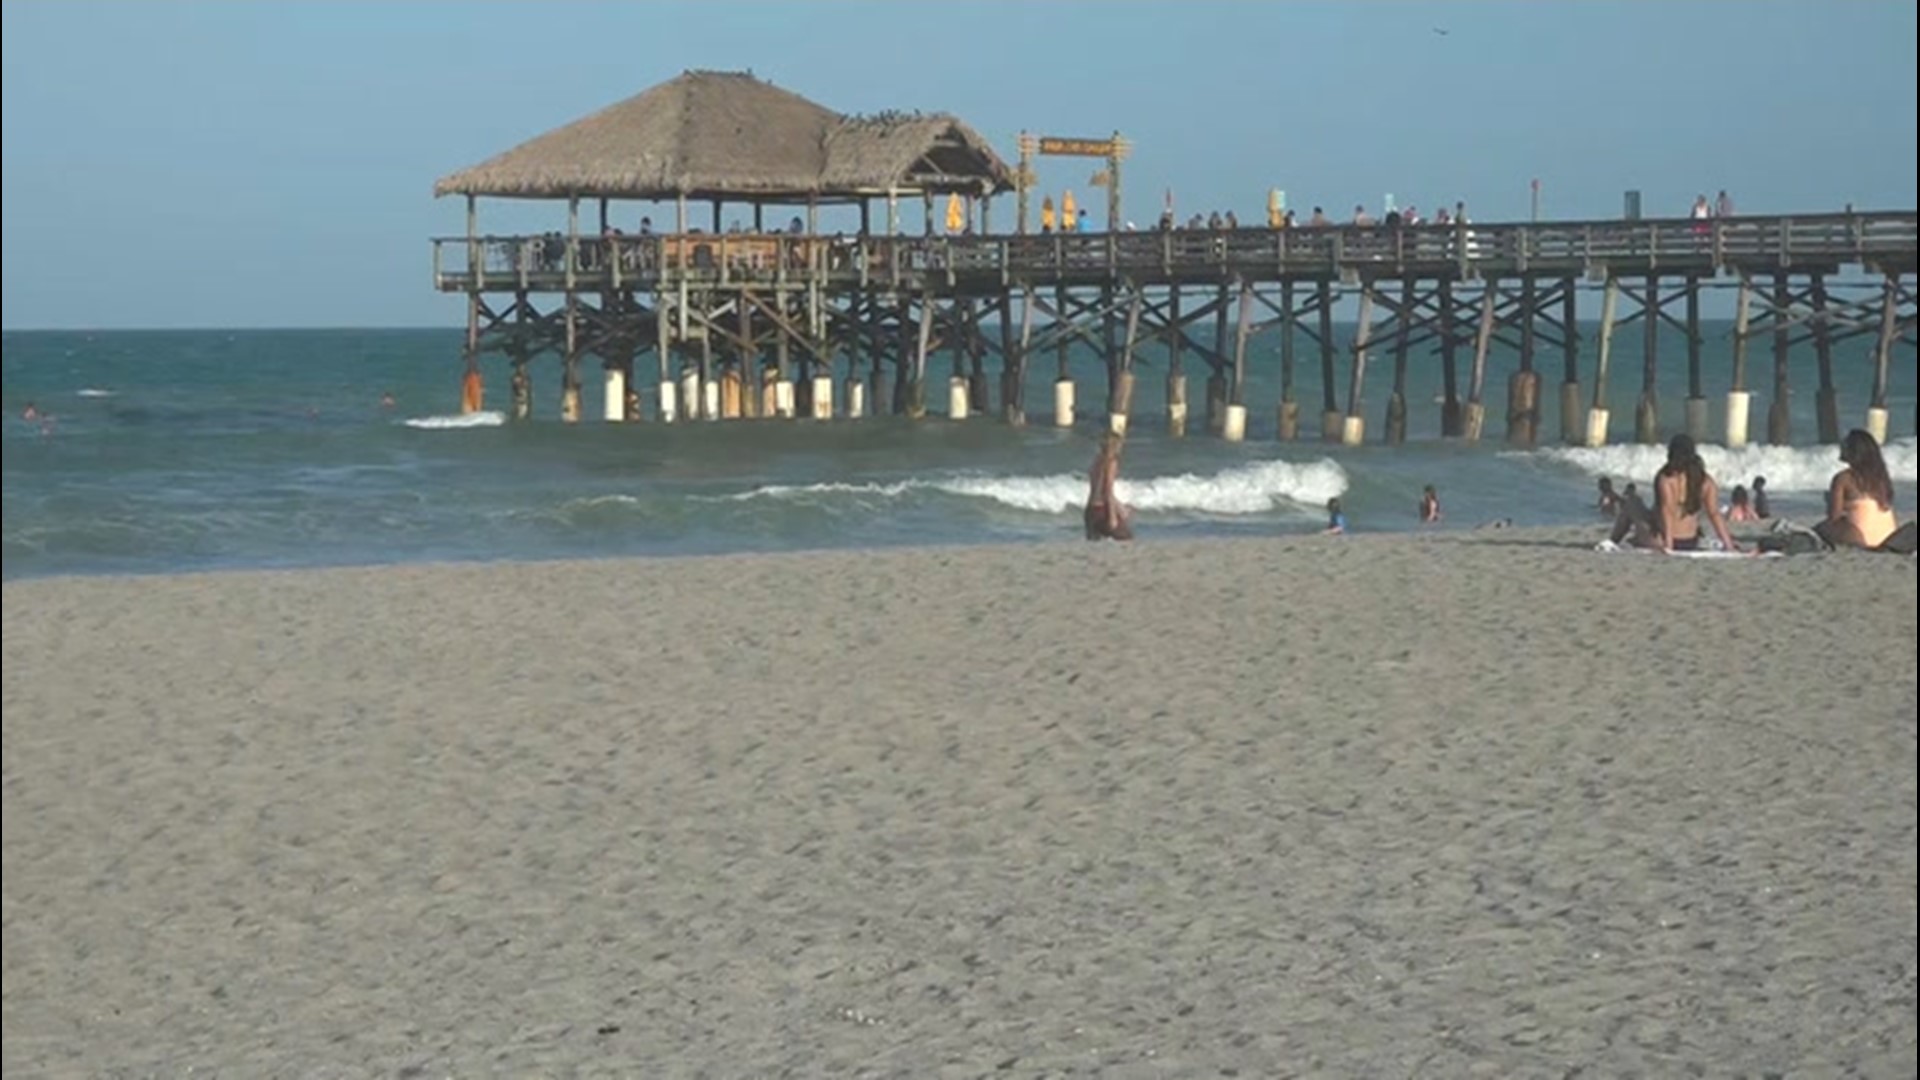 Jonathan Petramala was live in Cocoa Beach, Florida, on July 31, to see how residents and tourist were getting ready for incoming Hurricane Isaias.